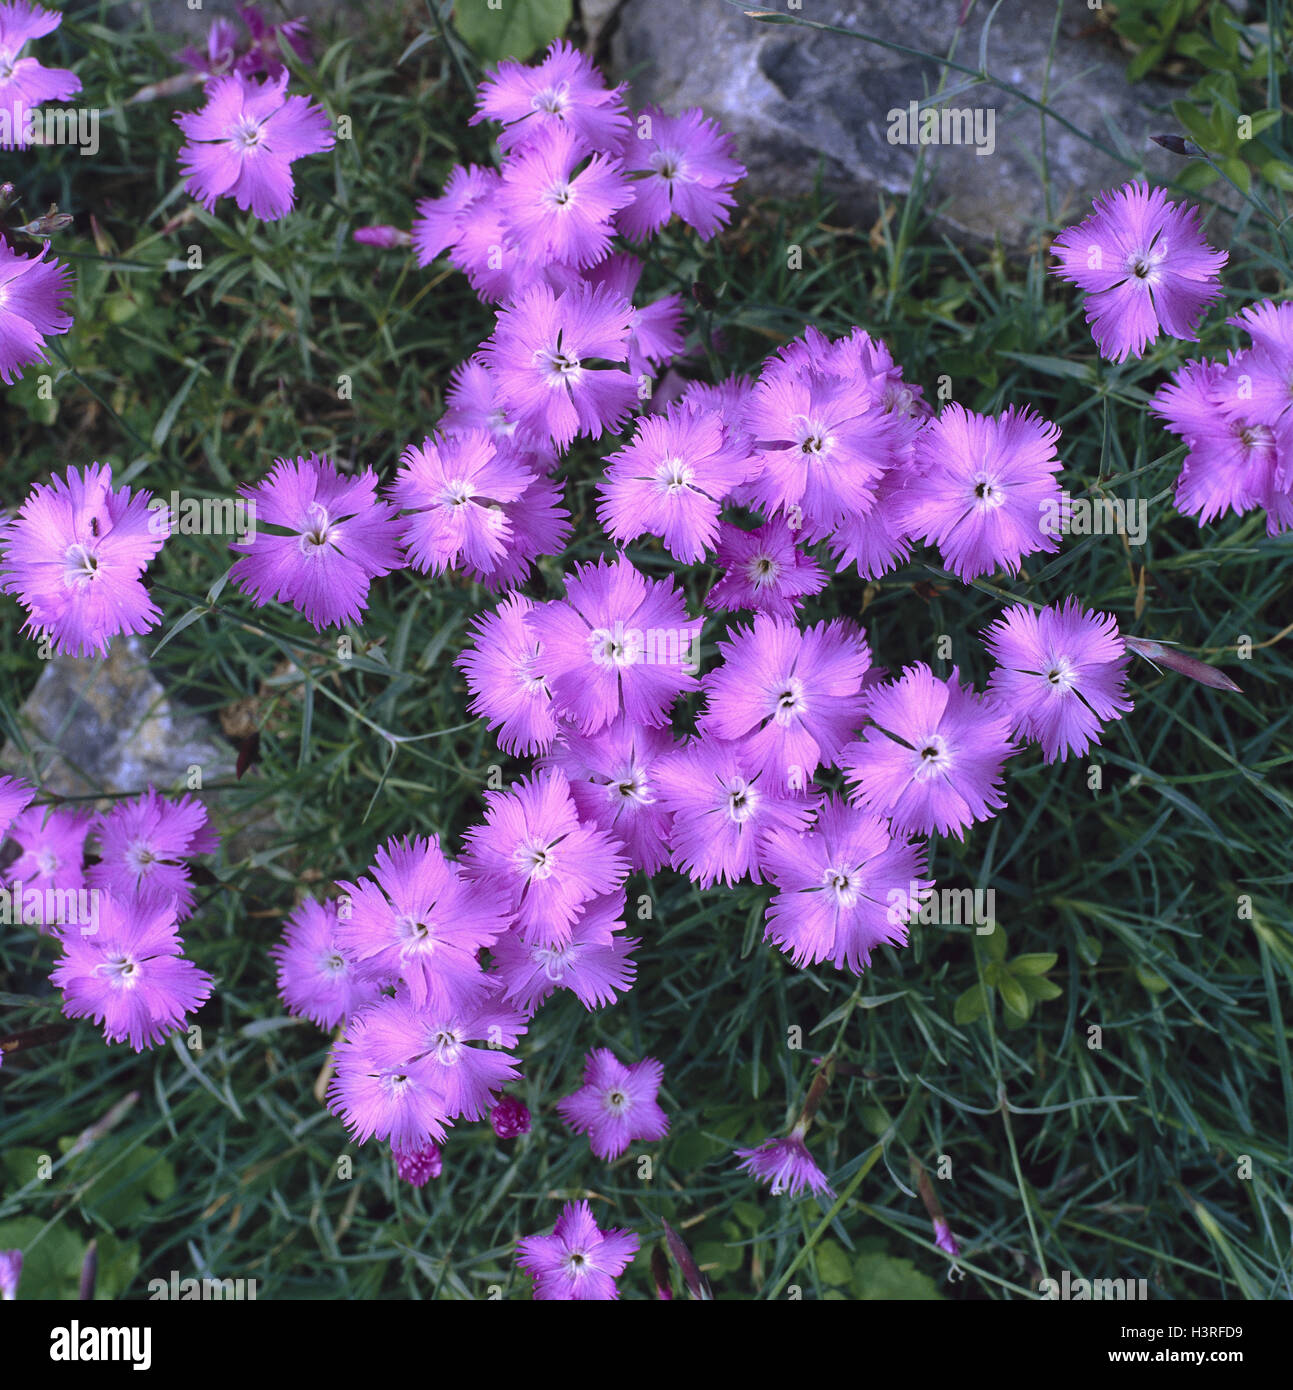 Dolomite clove, Dianthus sternbergii nature, botany, flora, plants, flowers, Alpine flowers, clove plants, blossoms, blossom, pink, period bloom, from July to August, star-shaped Stock Photo